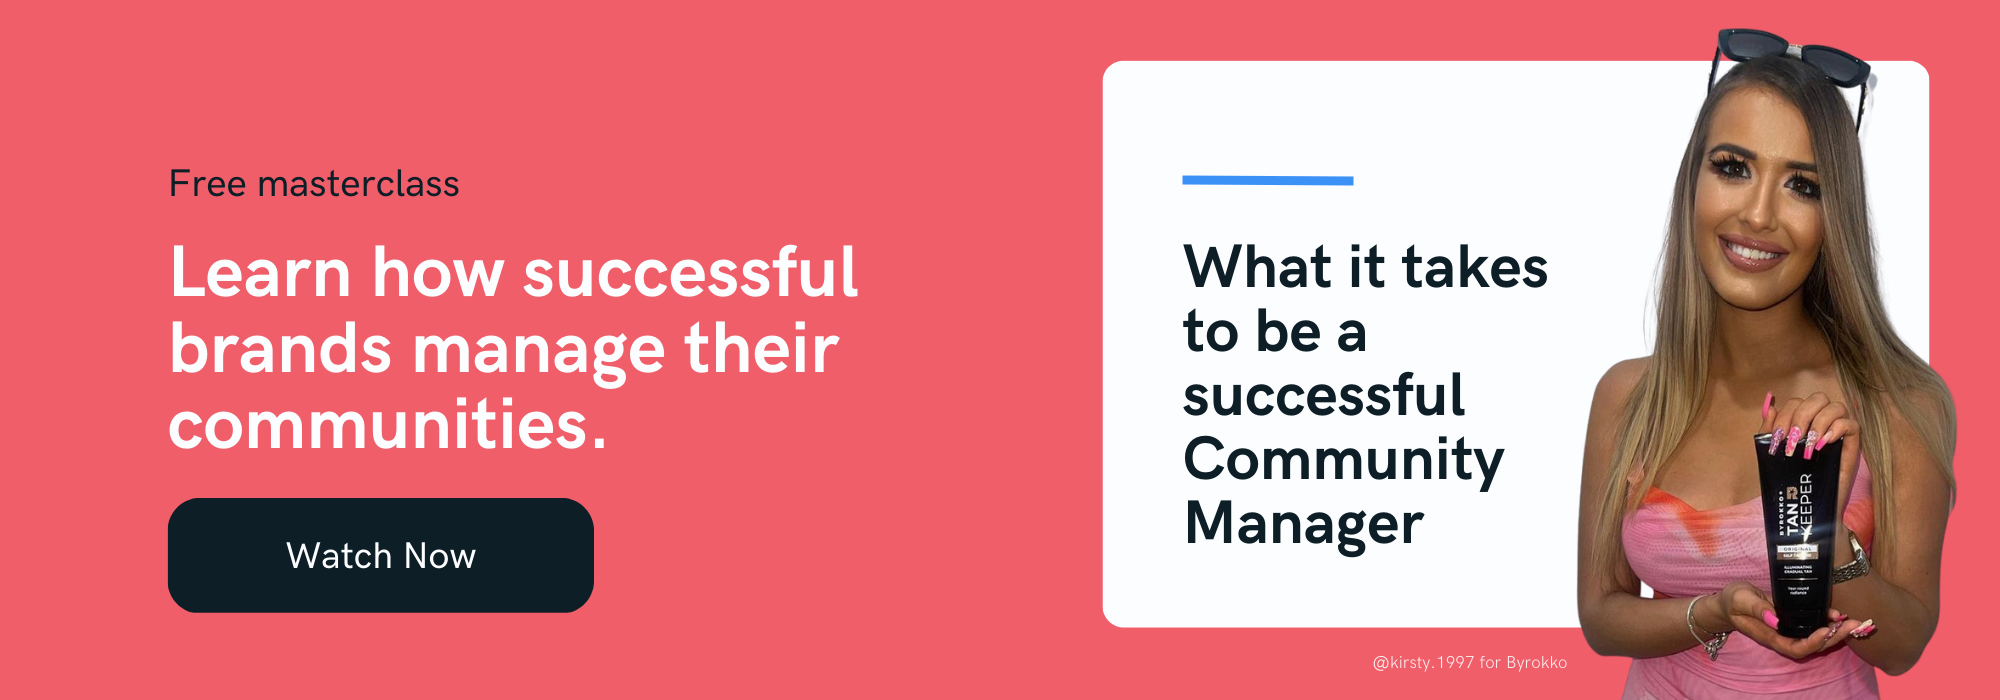 What it takes to be a successful Community Manager